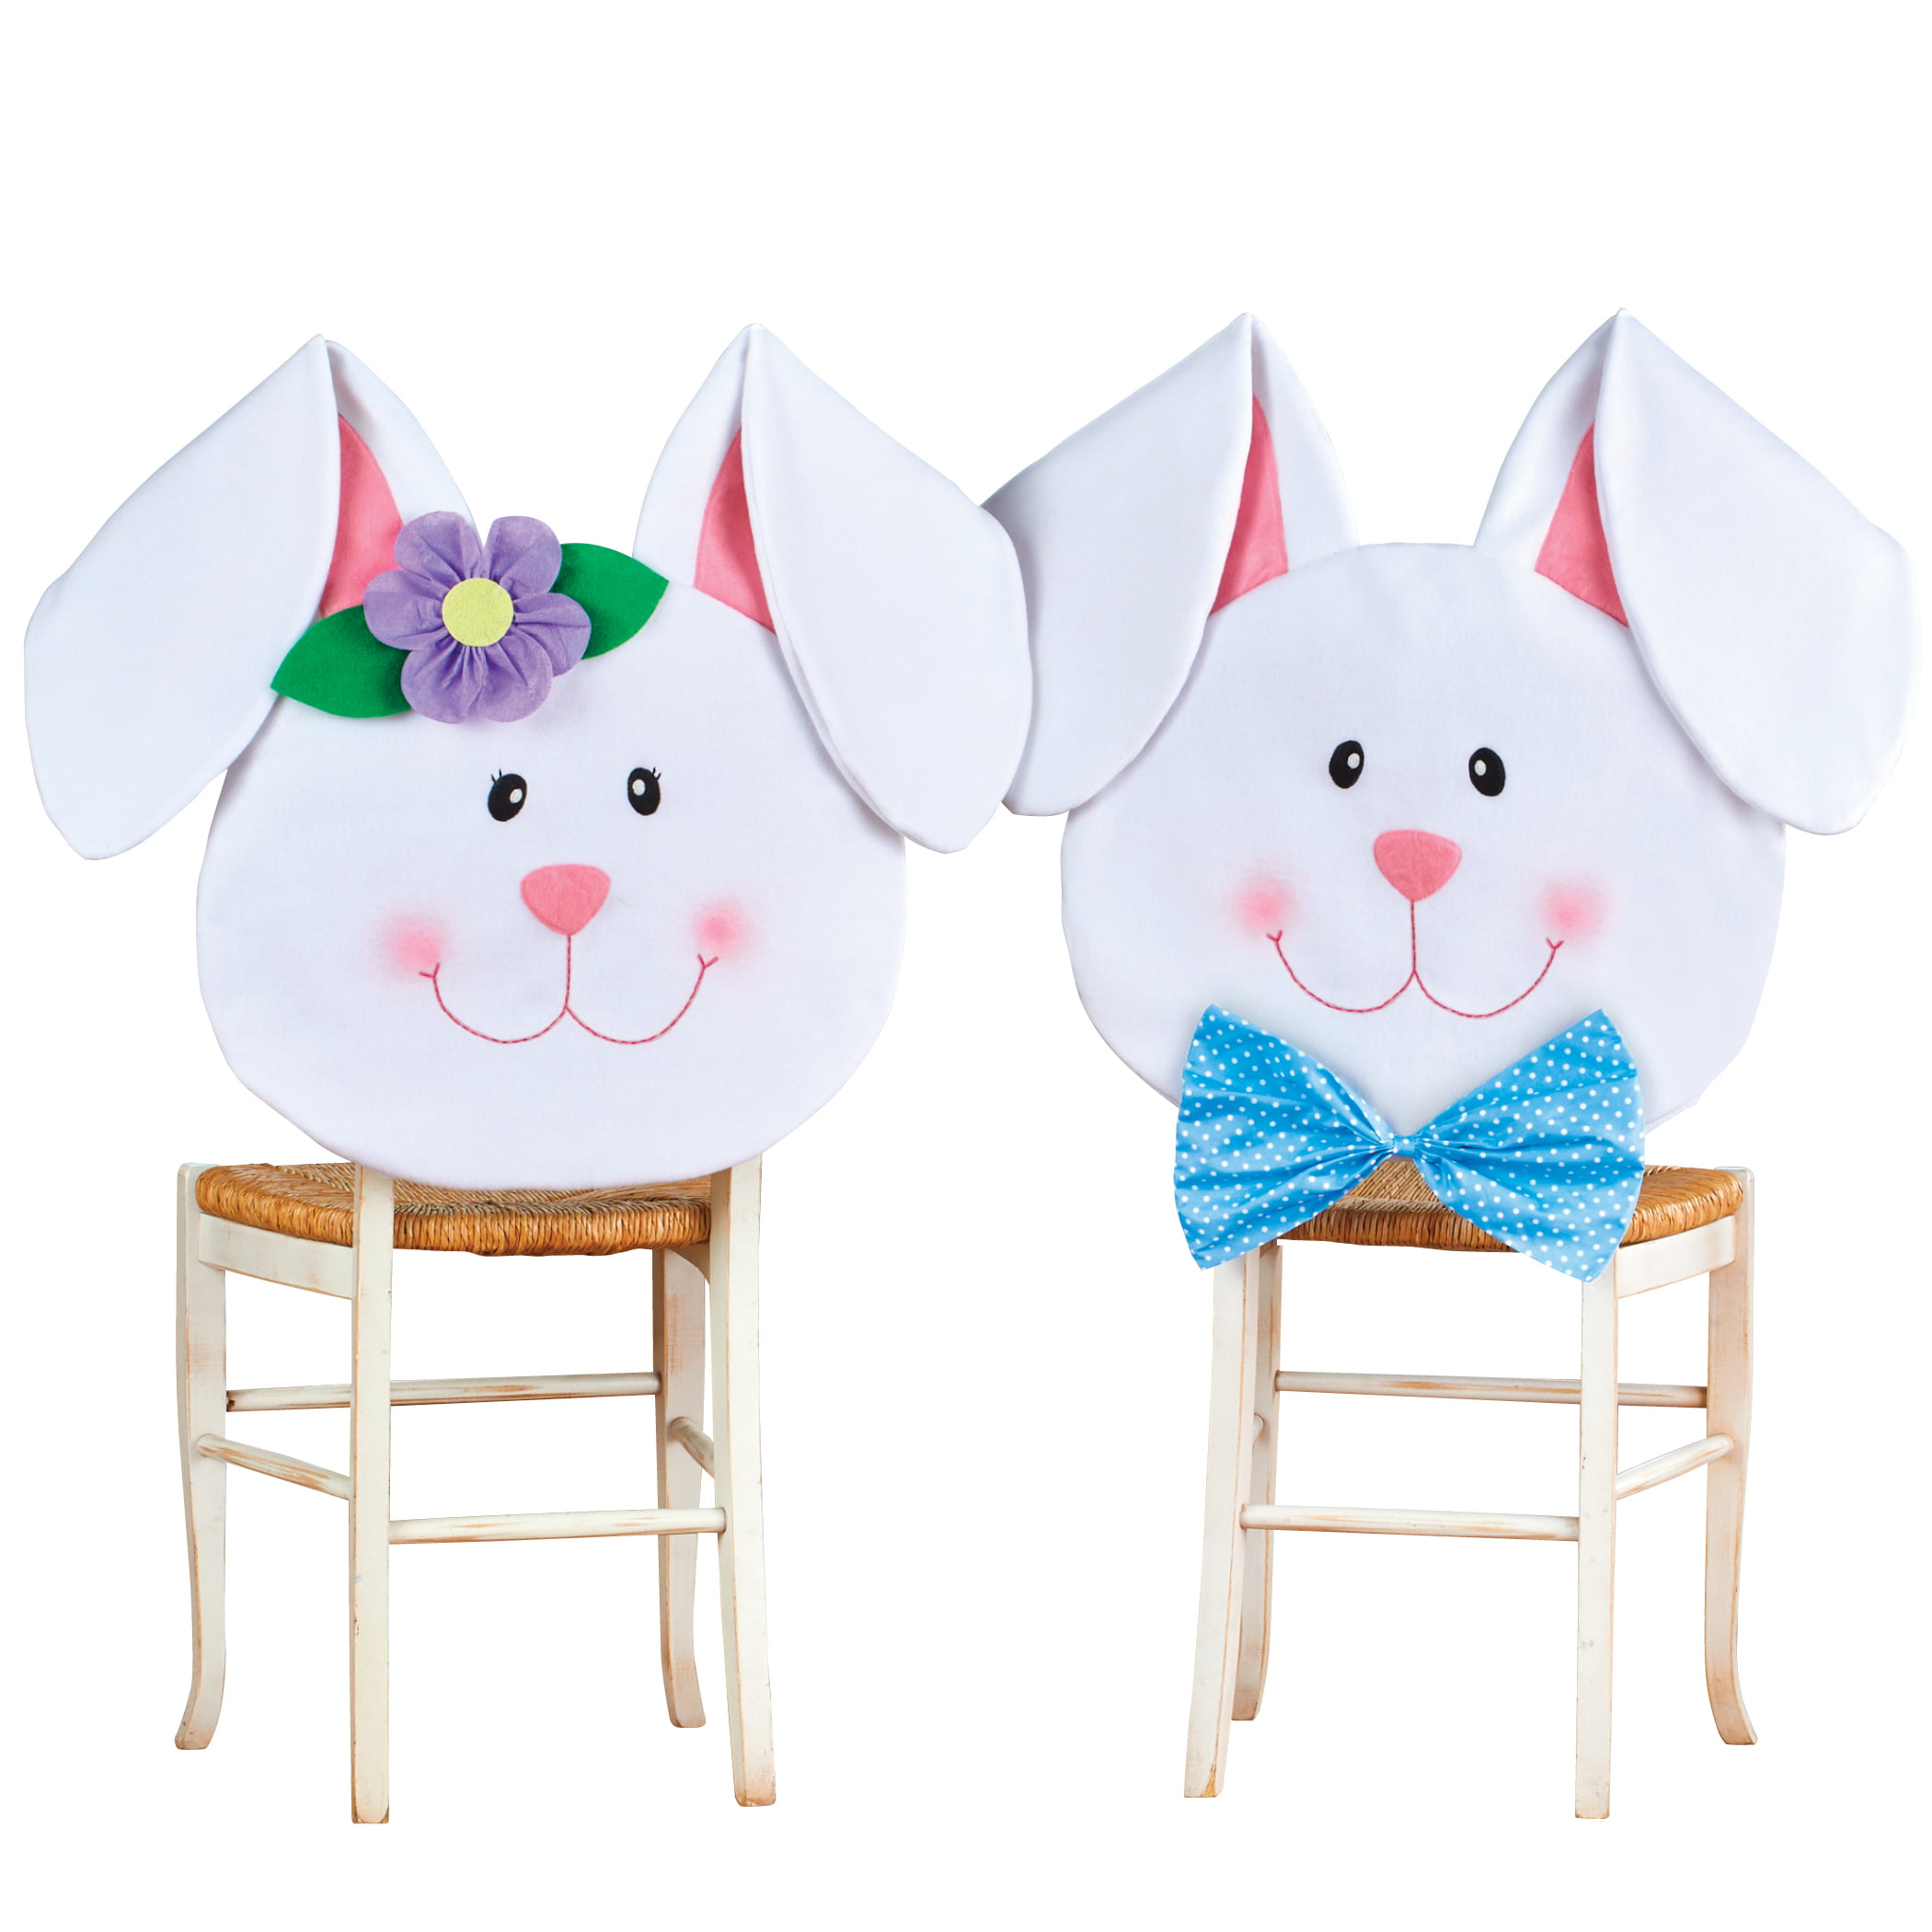 Decorative Slide On Easter Chair Back Covers - Set of 2 - Boy 